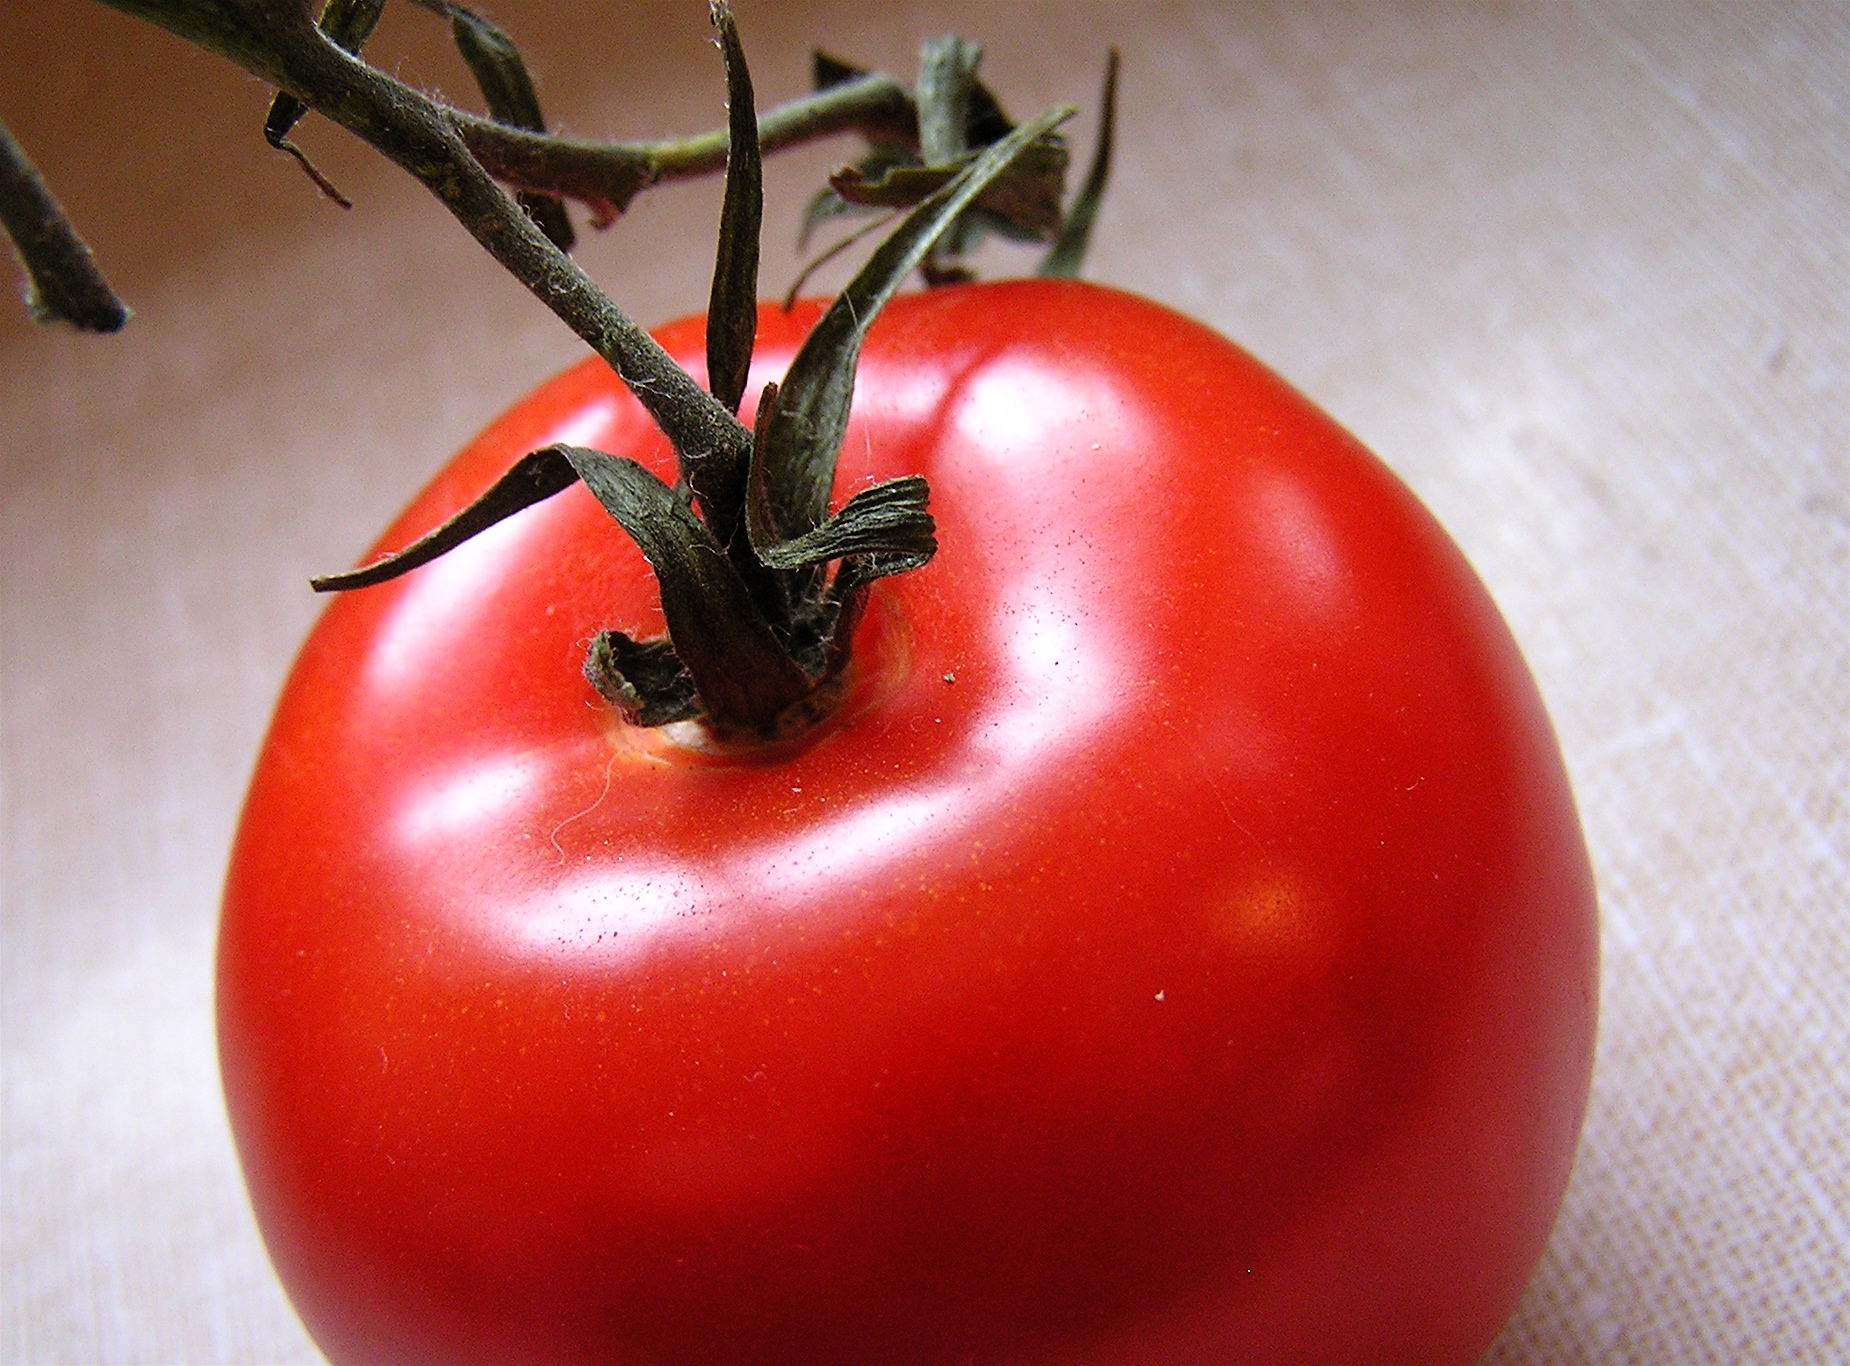 a large tomato with brown stem sitting on a table